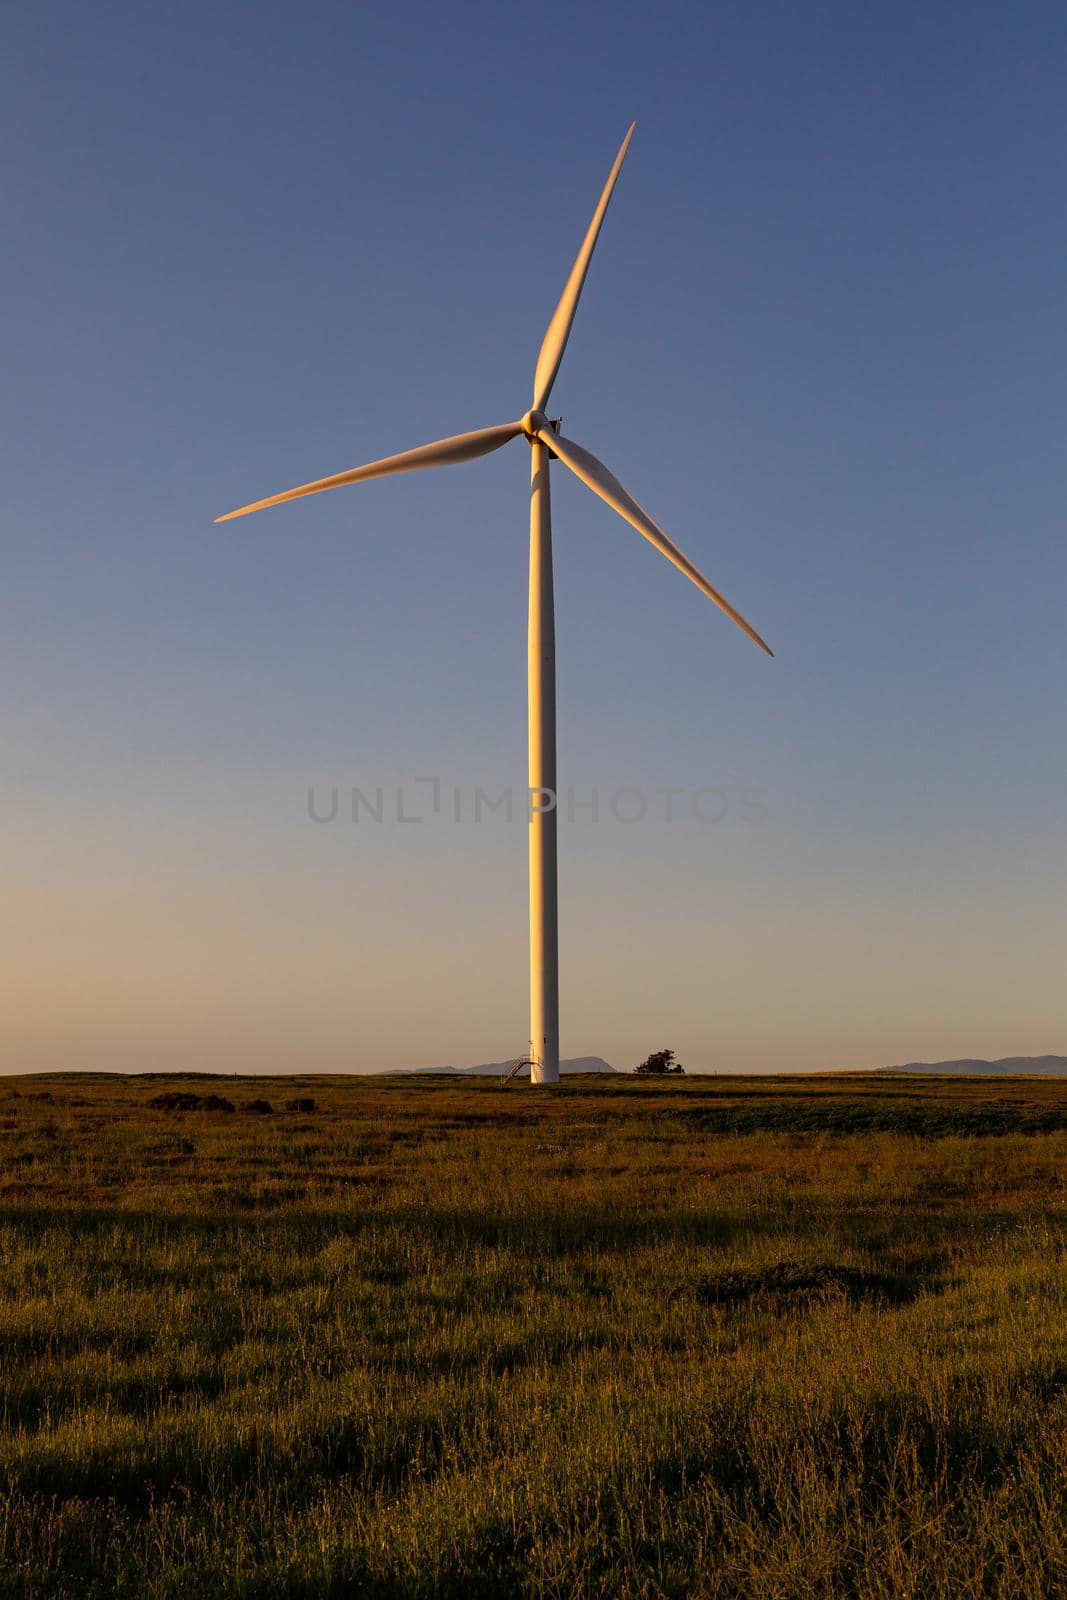 General view of wind turbine in countryside landscape with cloudless sky by Wavebreakmedia